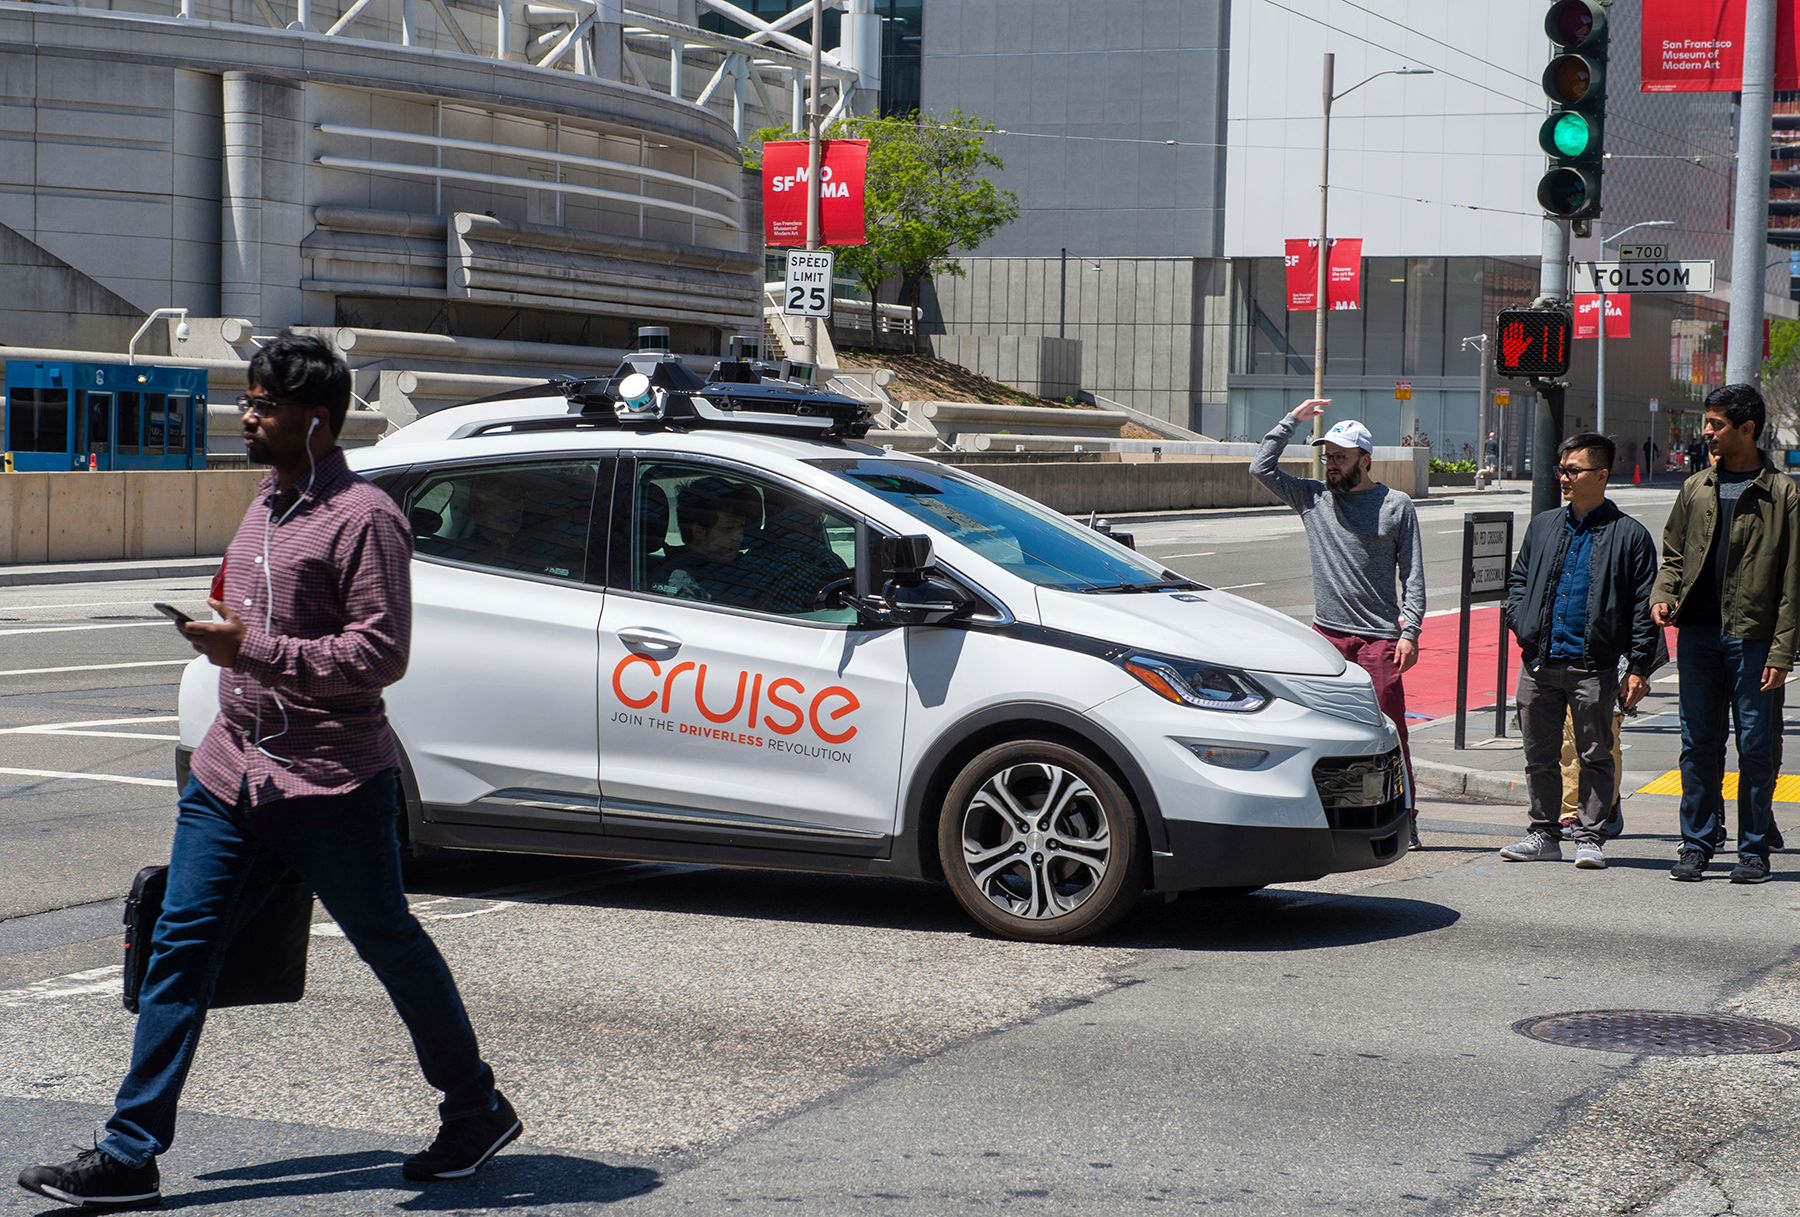 https://spectrum.ieee.org/media-library/less-than-p-greater-than-this-self-driving-cruise-robotaxi-got-stuck-at-a-crossroads-in-san-francisco-in-2019-inconveniencing-pedestrians-less-than-p-greater-than.png?id=34681890